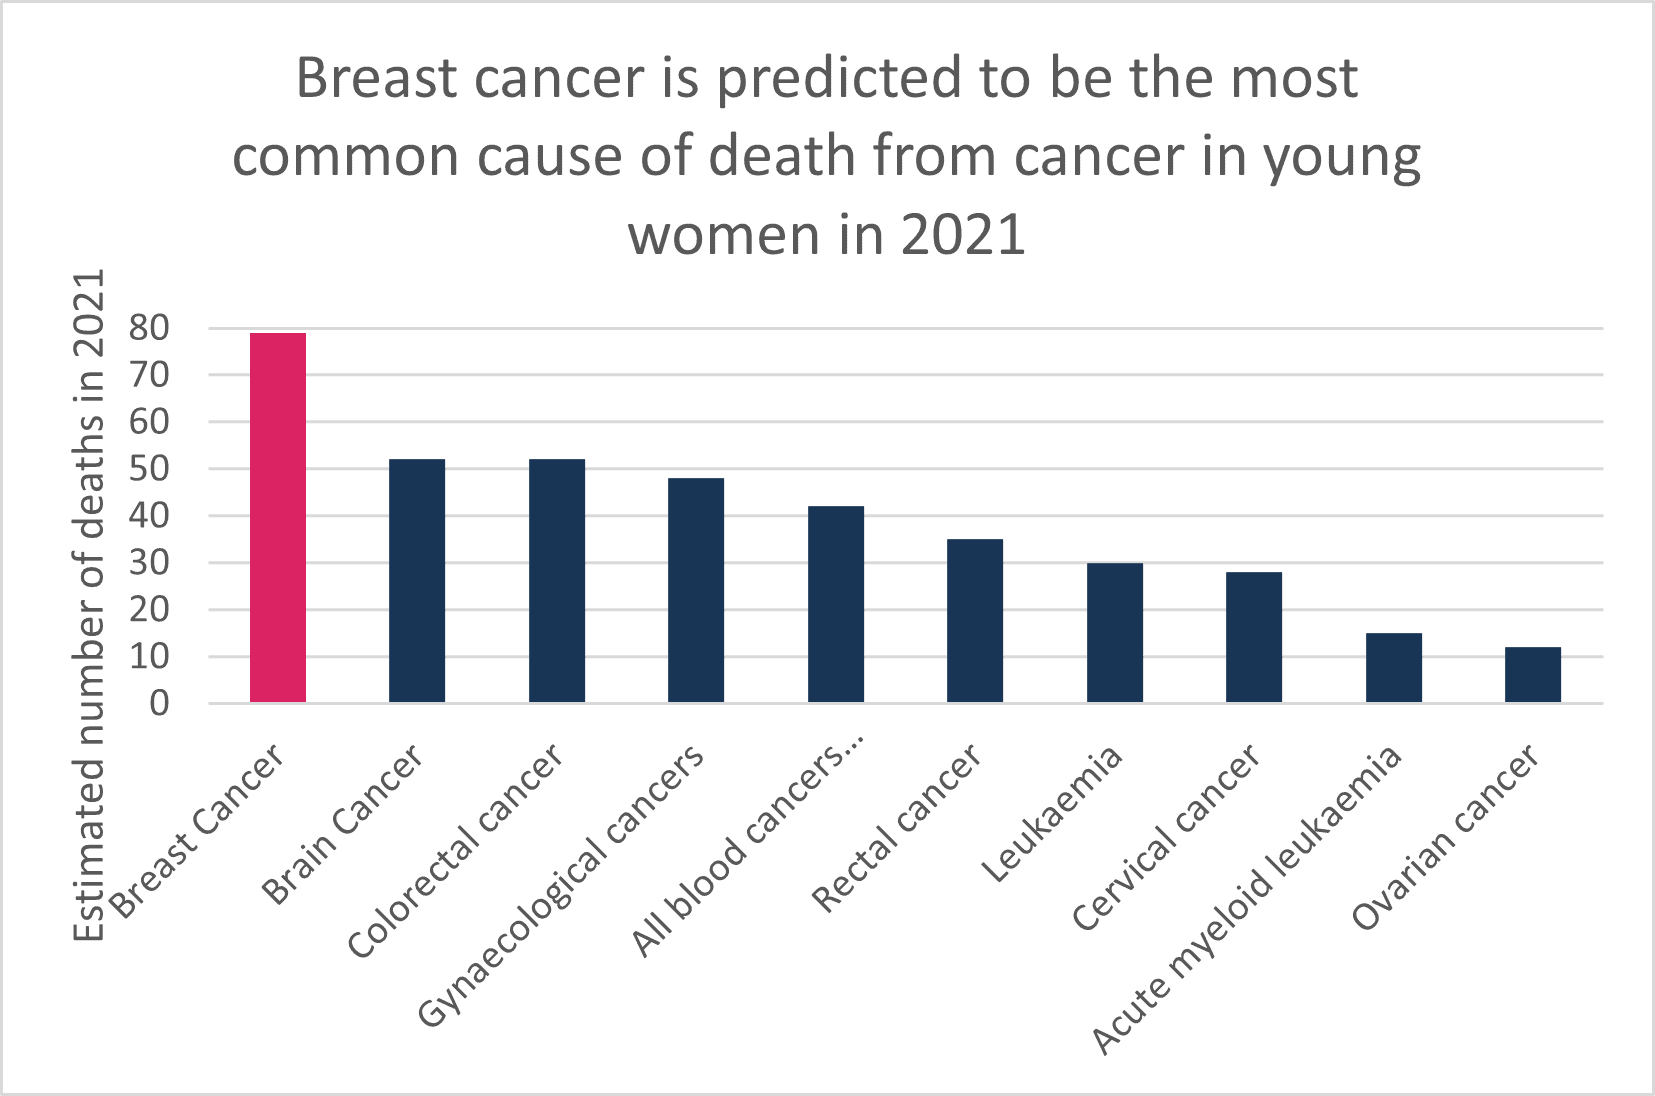 Proportion of the familial component of breast cancer caused by